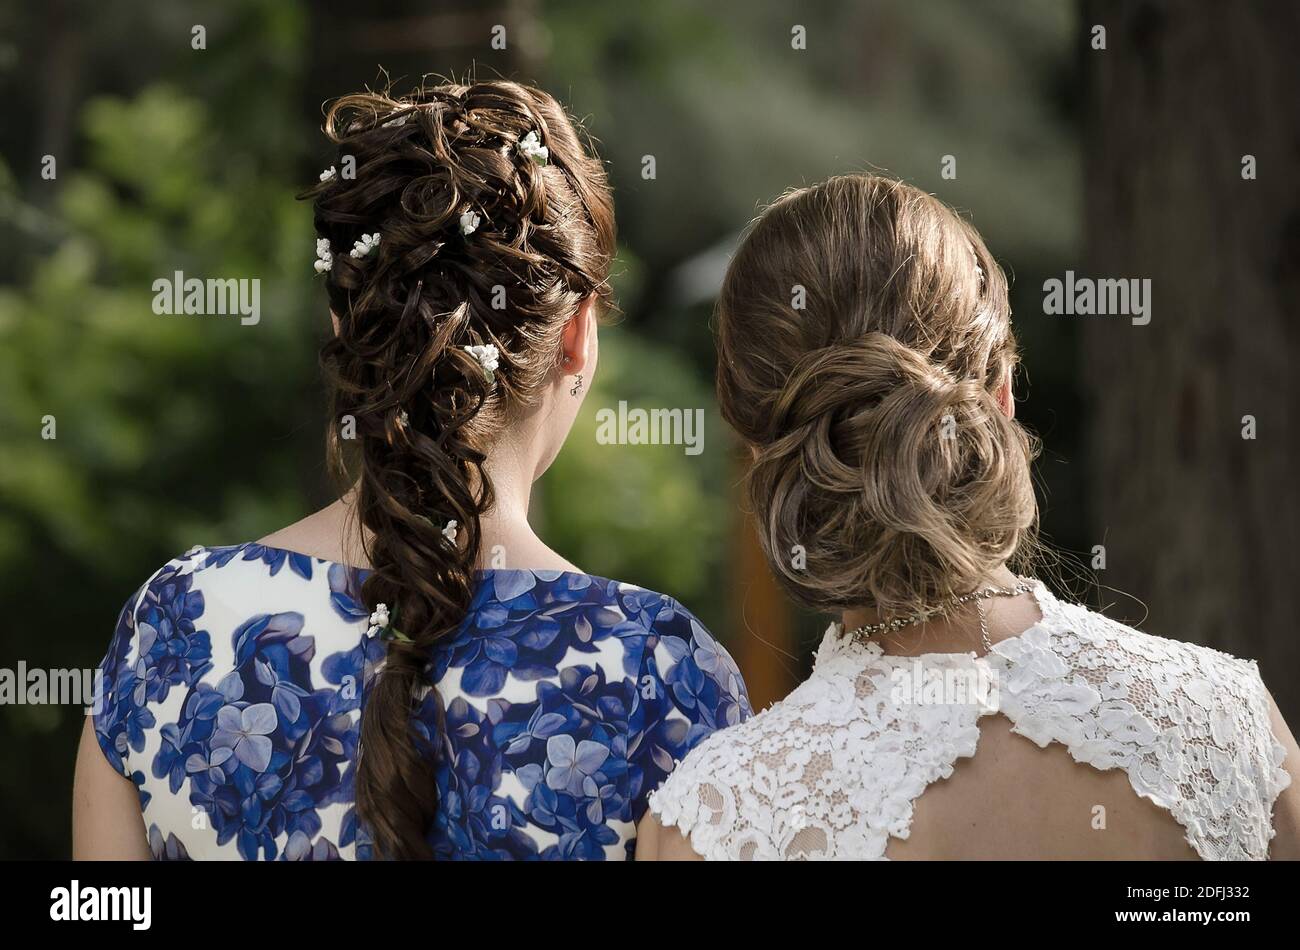 Two wedding hairstyles close up back view on the head of two girls Stock Photo